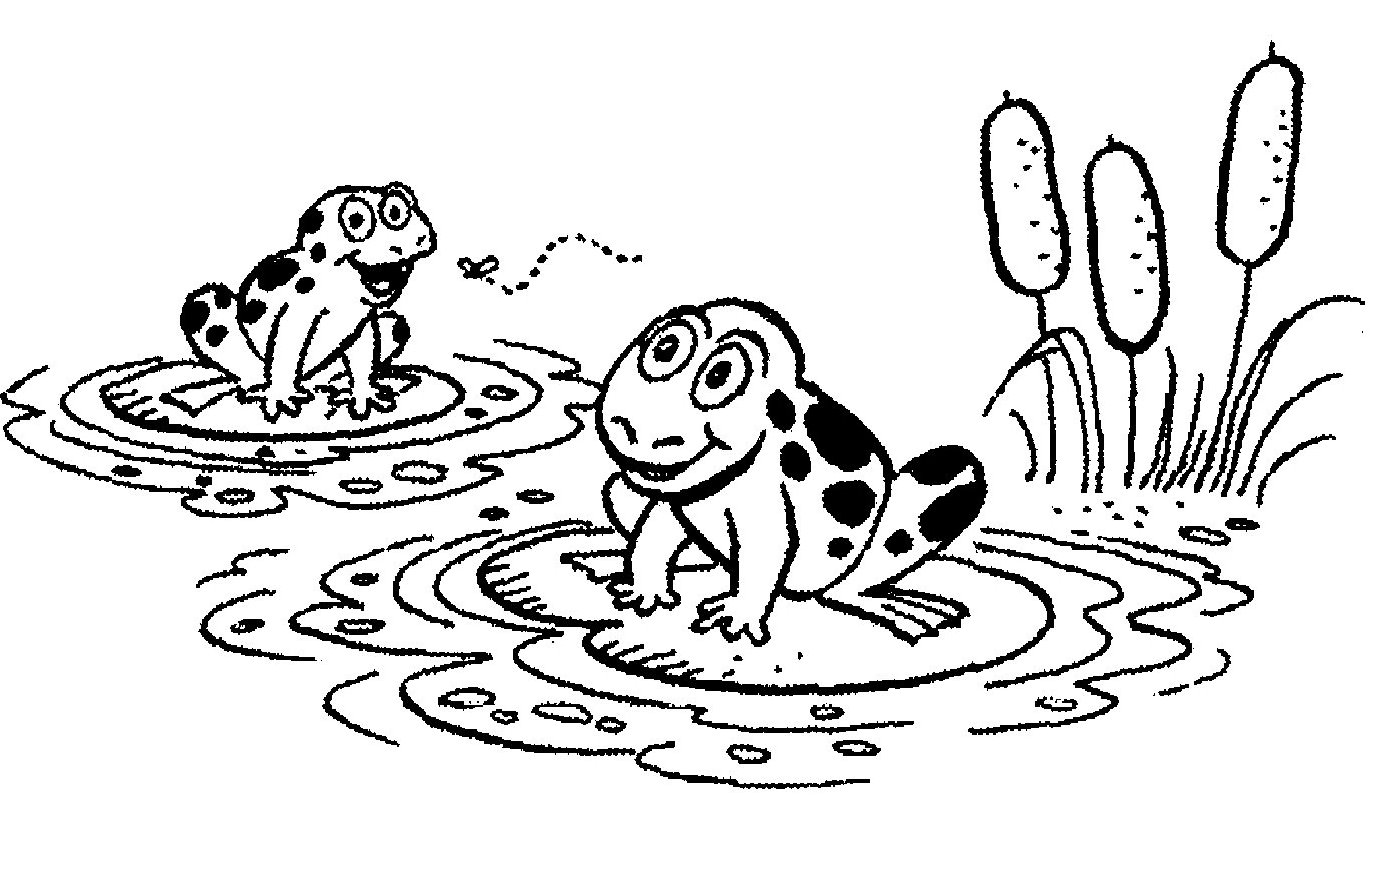 frog clipart free black and white - photo #33